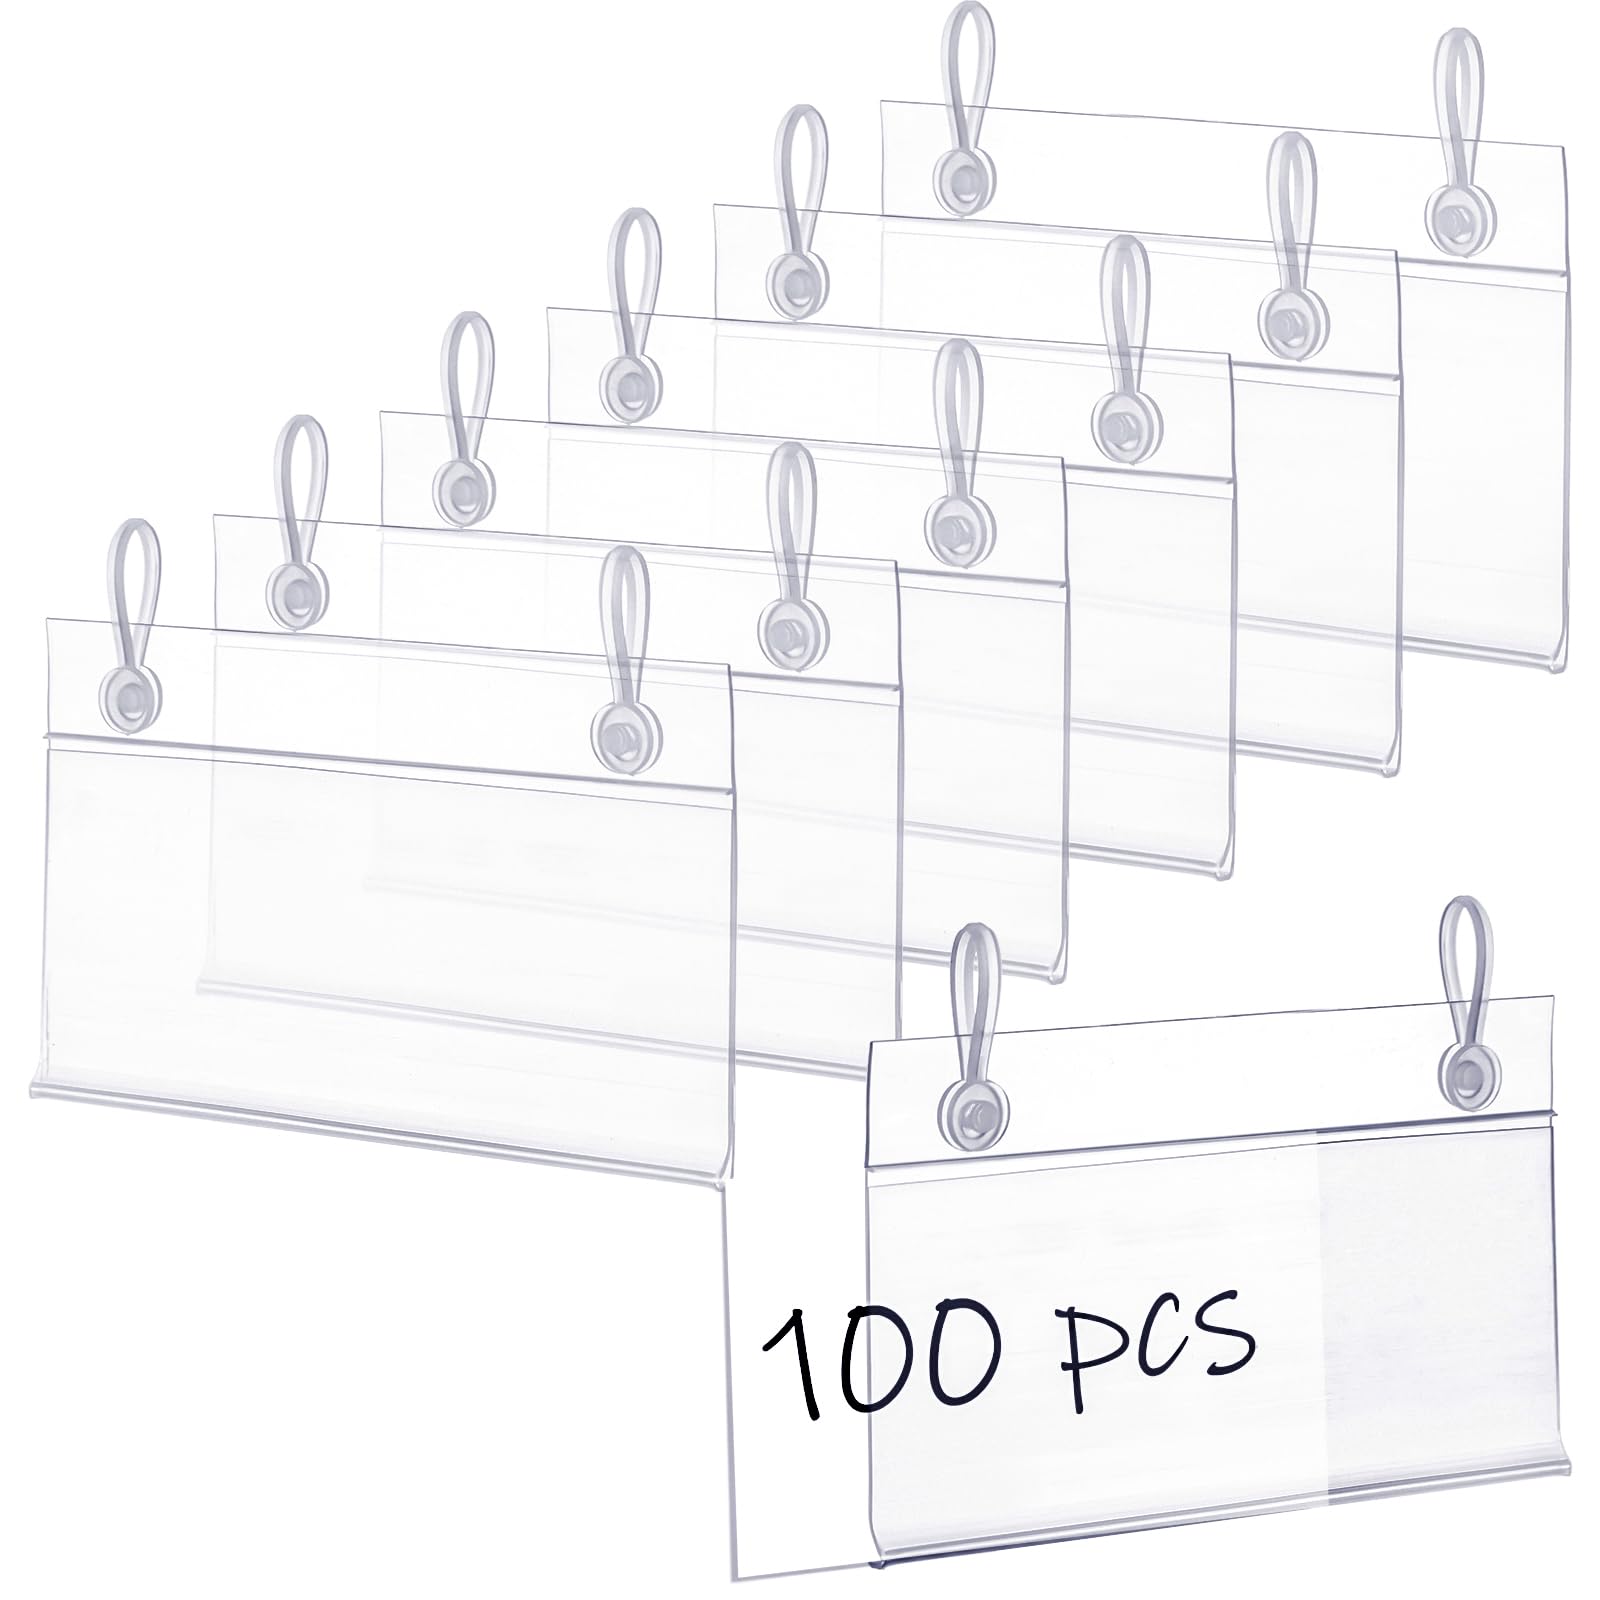 Elsjoy 100 Pack Plastic Wire Shelf Label Holders, 4" x 2.3" Clear Price Tag Holder Sign & Ticket Holder with Double Snap Lock Closure, Reusable Basket Label Holders for Market, Retail Shop, Pantry